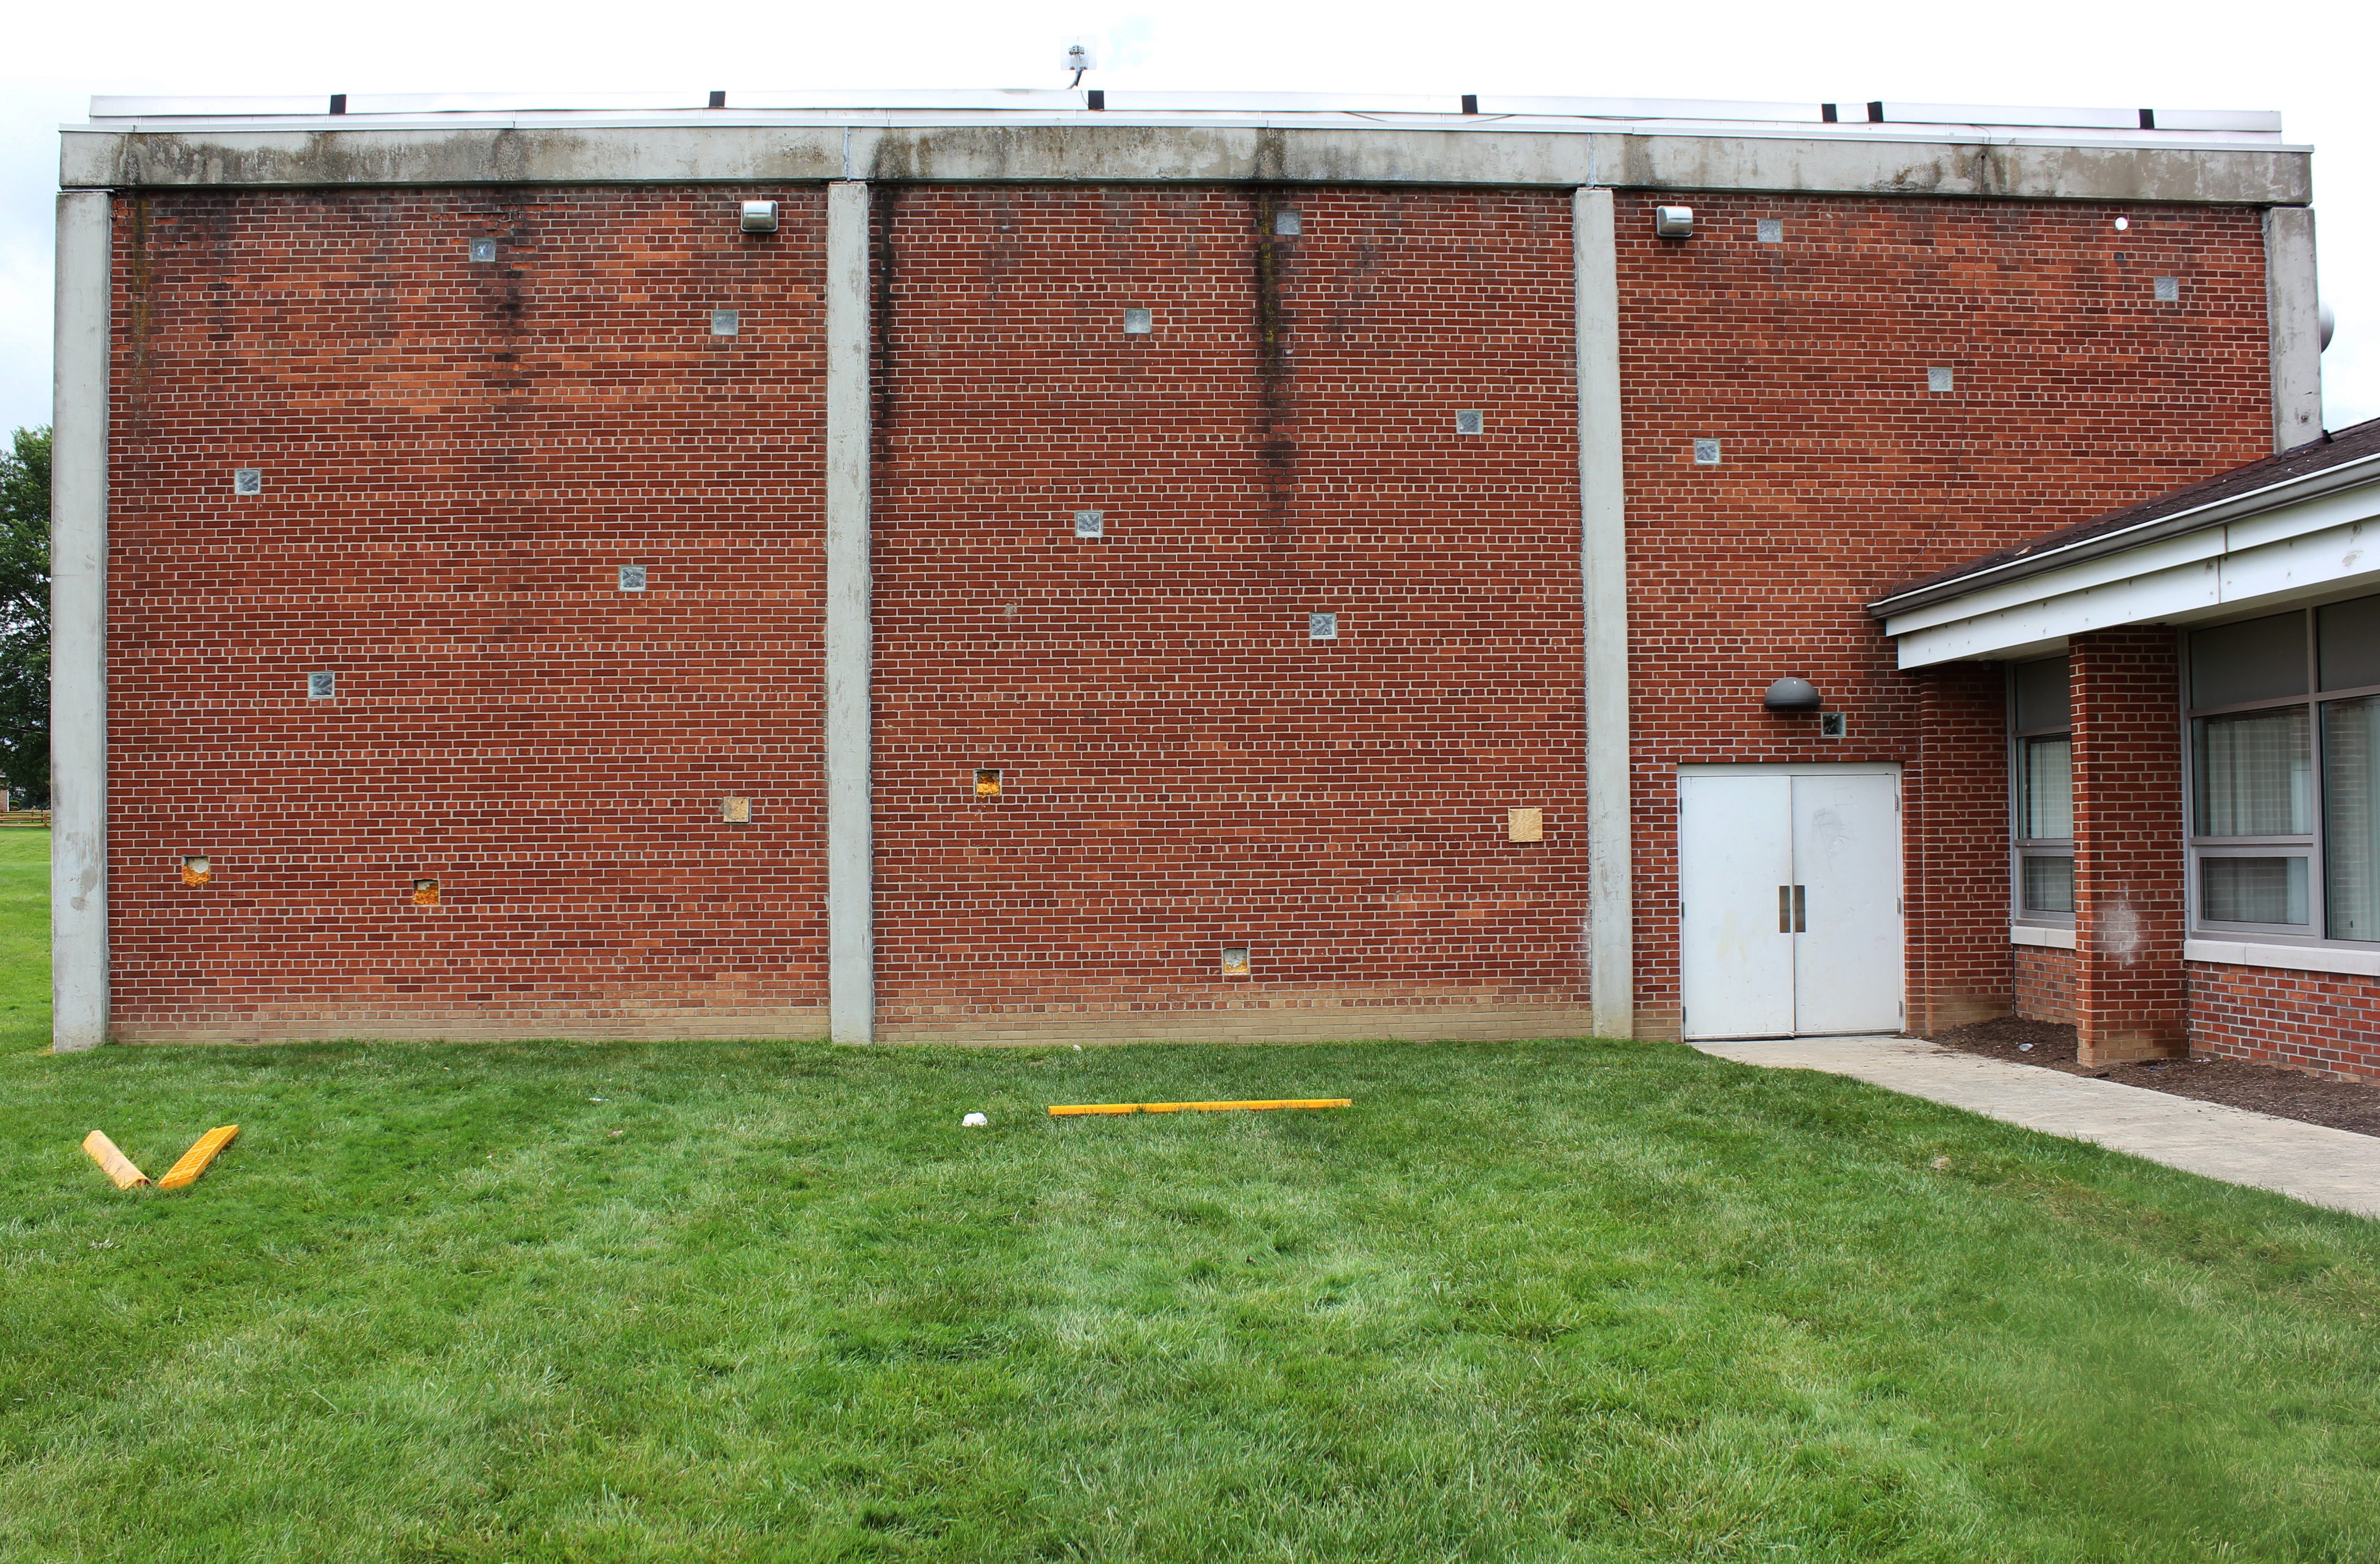 The side of the Boys' Village gym shows its age with weathered bricks and broken windows